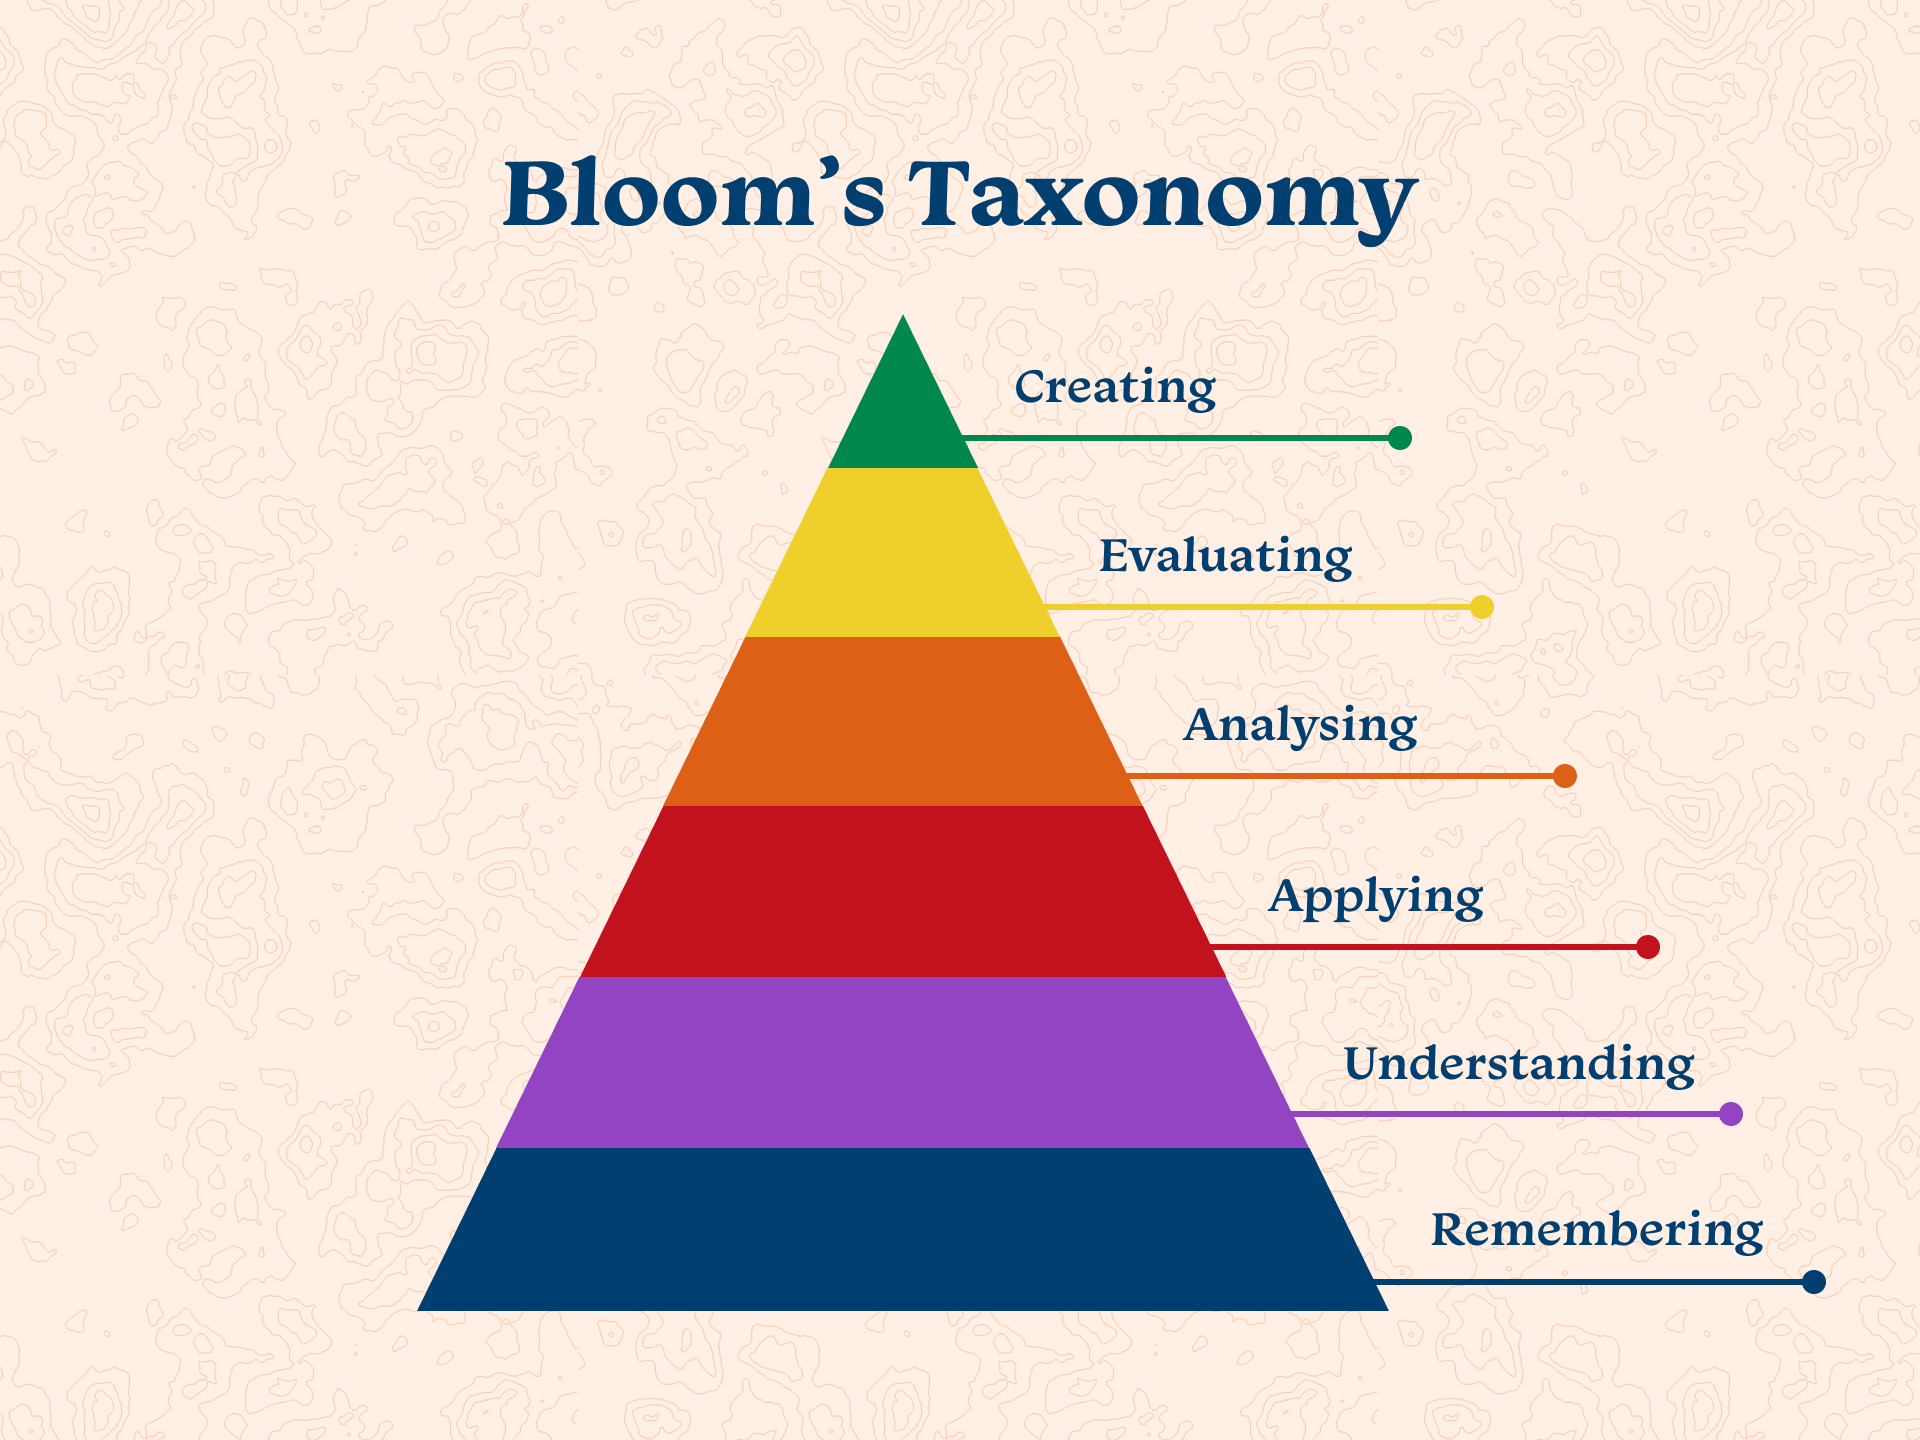 Bloom's Taxonomy visualised as a 6 tier pyramid. From bottom to top; Remembering, Understanding, Applying, Analysing, Evaluating and Creating